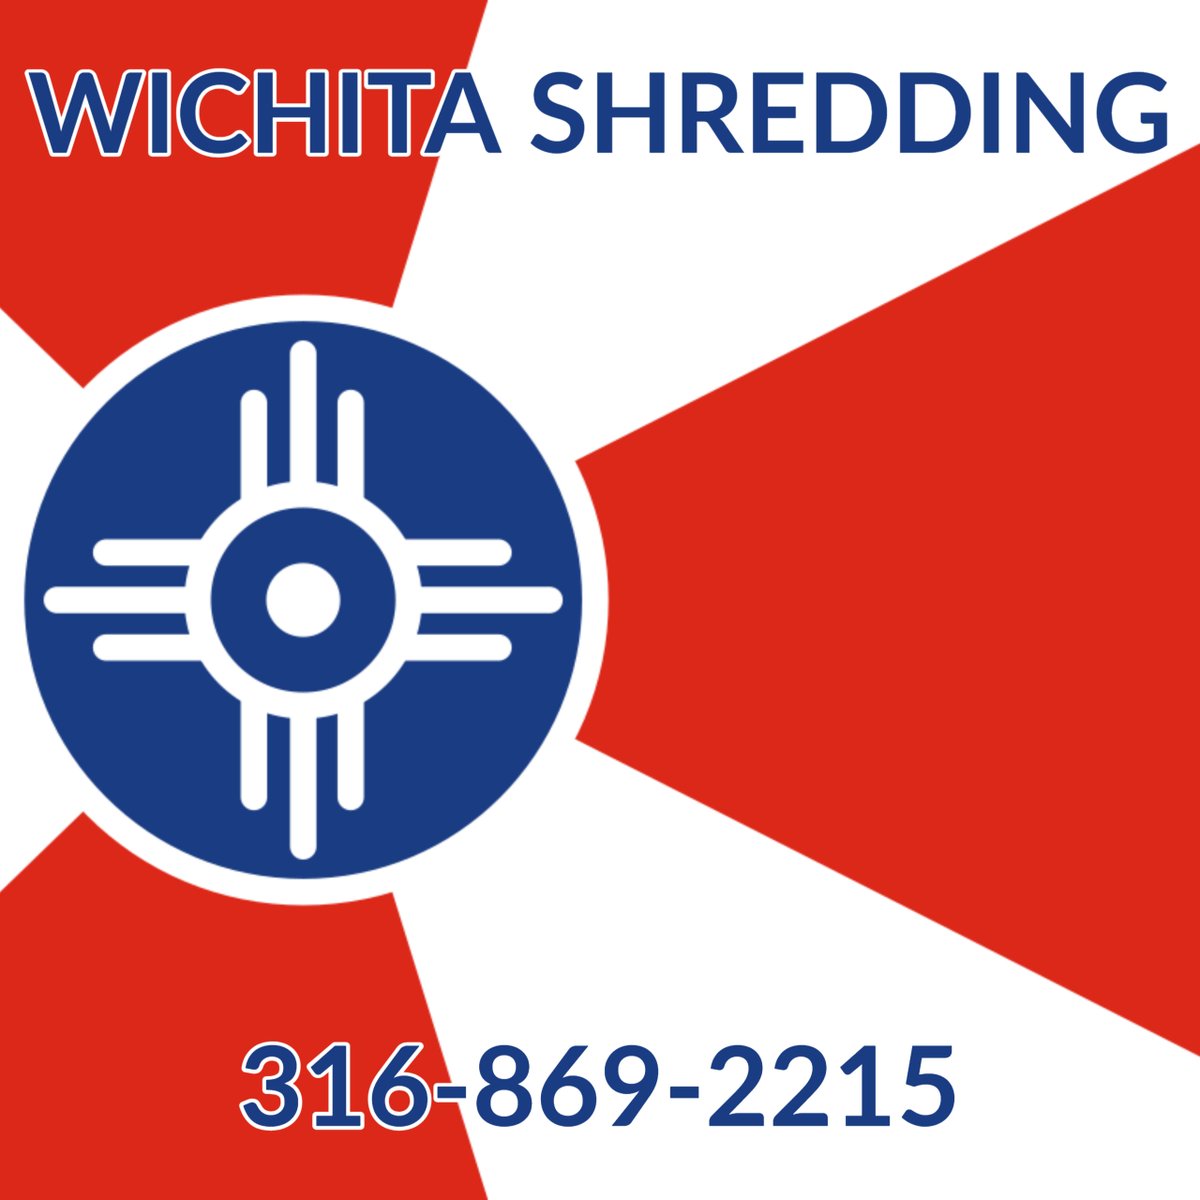 We are committed to providing the best customer service in the market. Wichita Shredding provides paper shredding and hard drive destruction to Wichita and surrounding areas.
#TradebankMember #ICTShredding